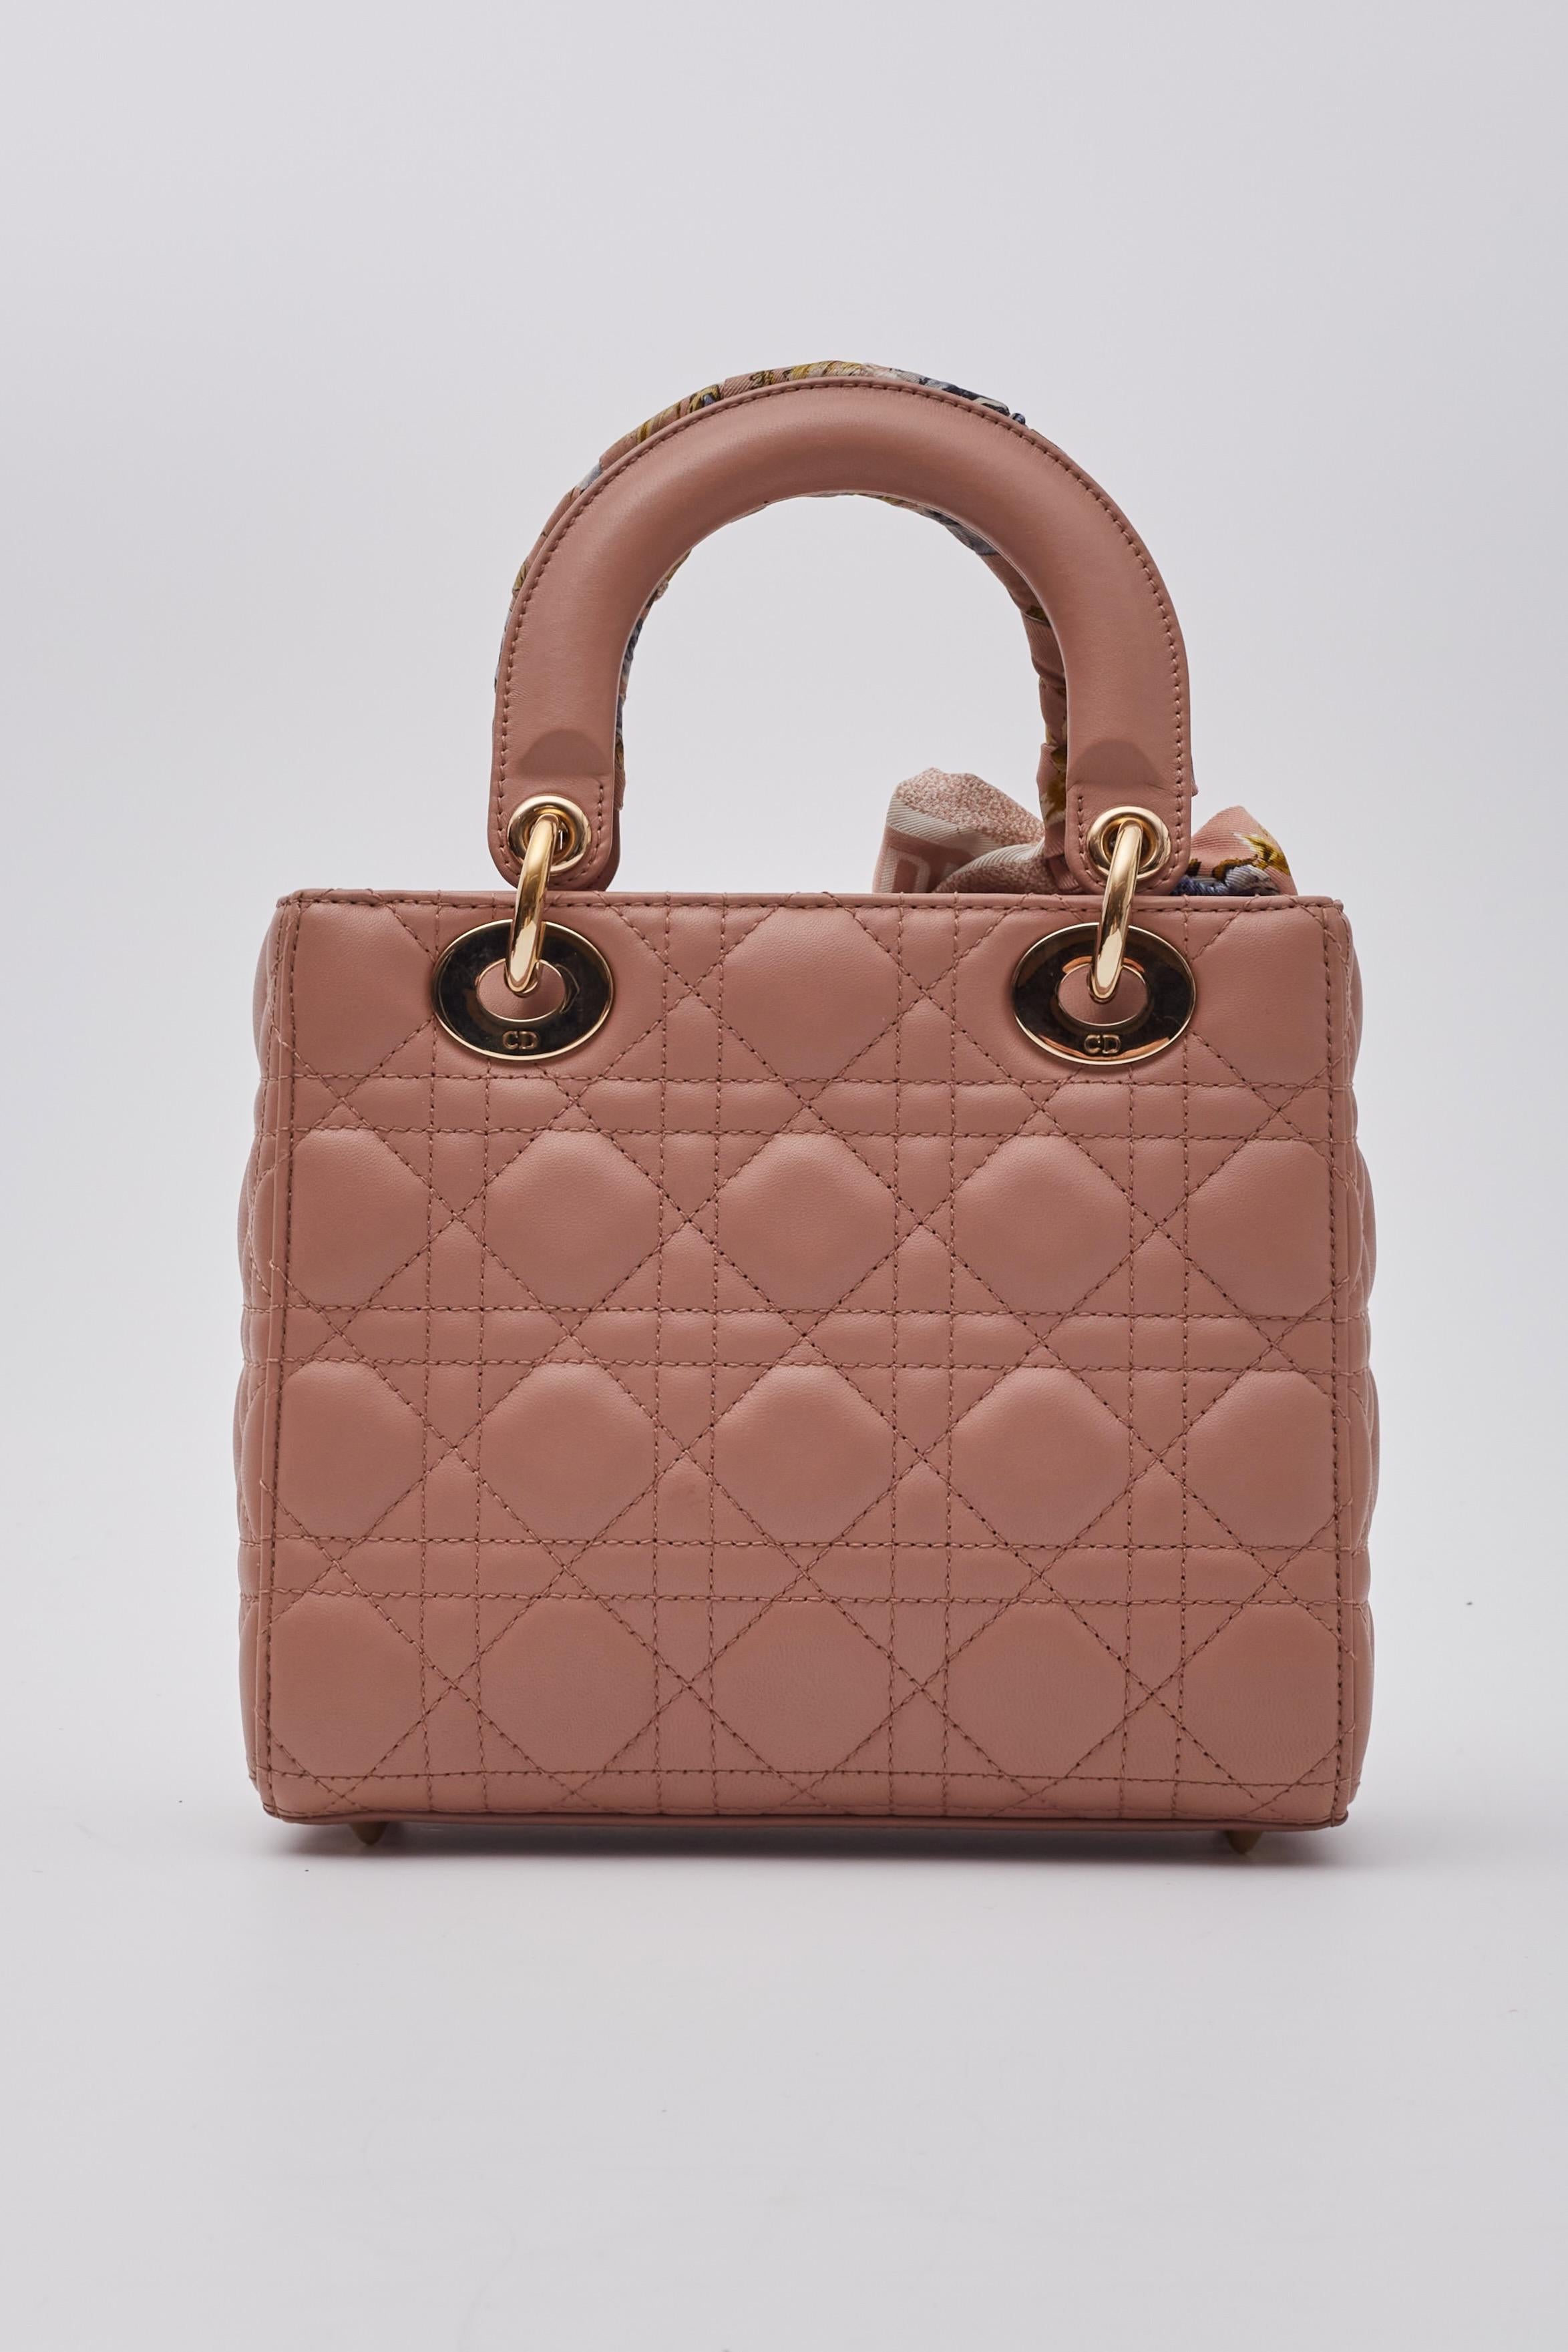 Dior Lambskin Cannage Soft Pink My Abcdior Lady Dior Fard Small For Sale 1